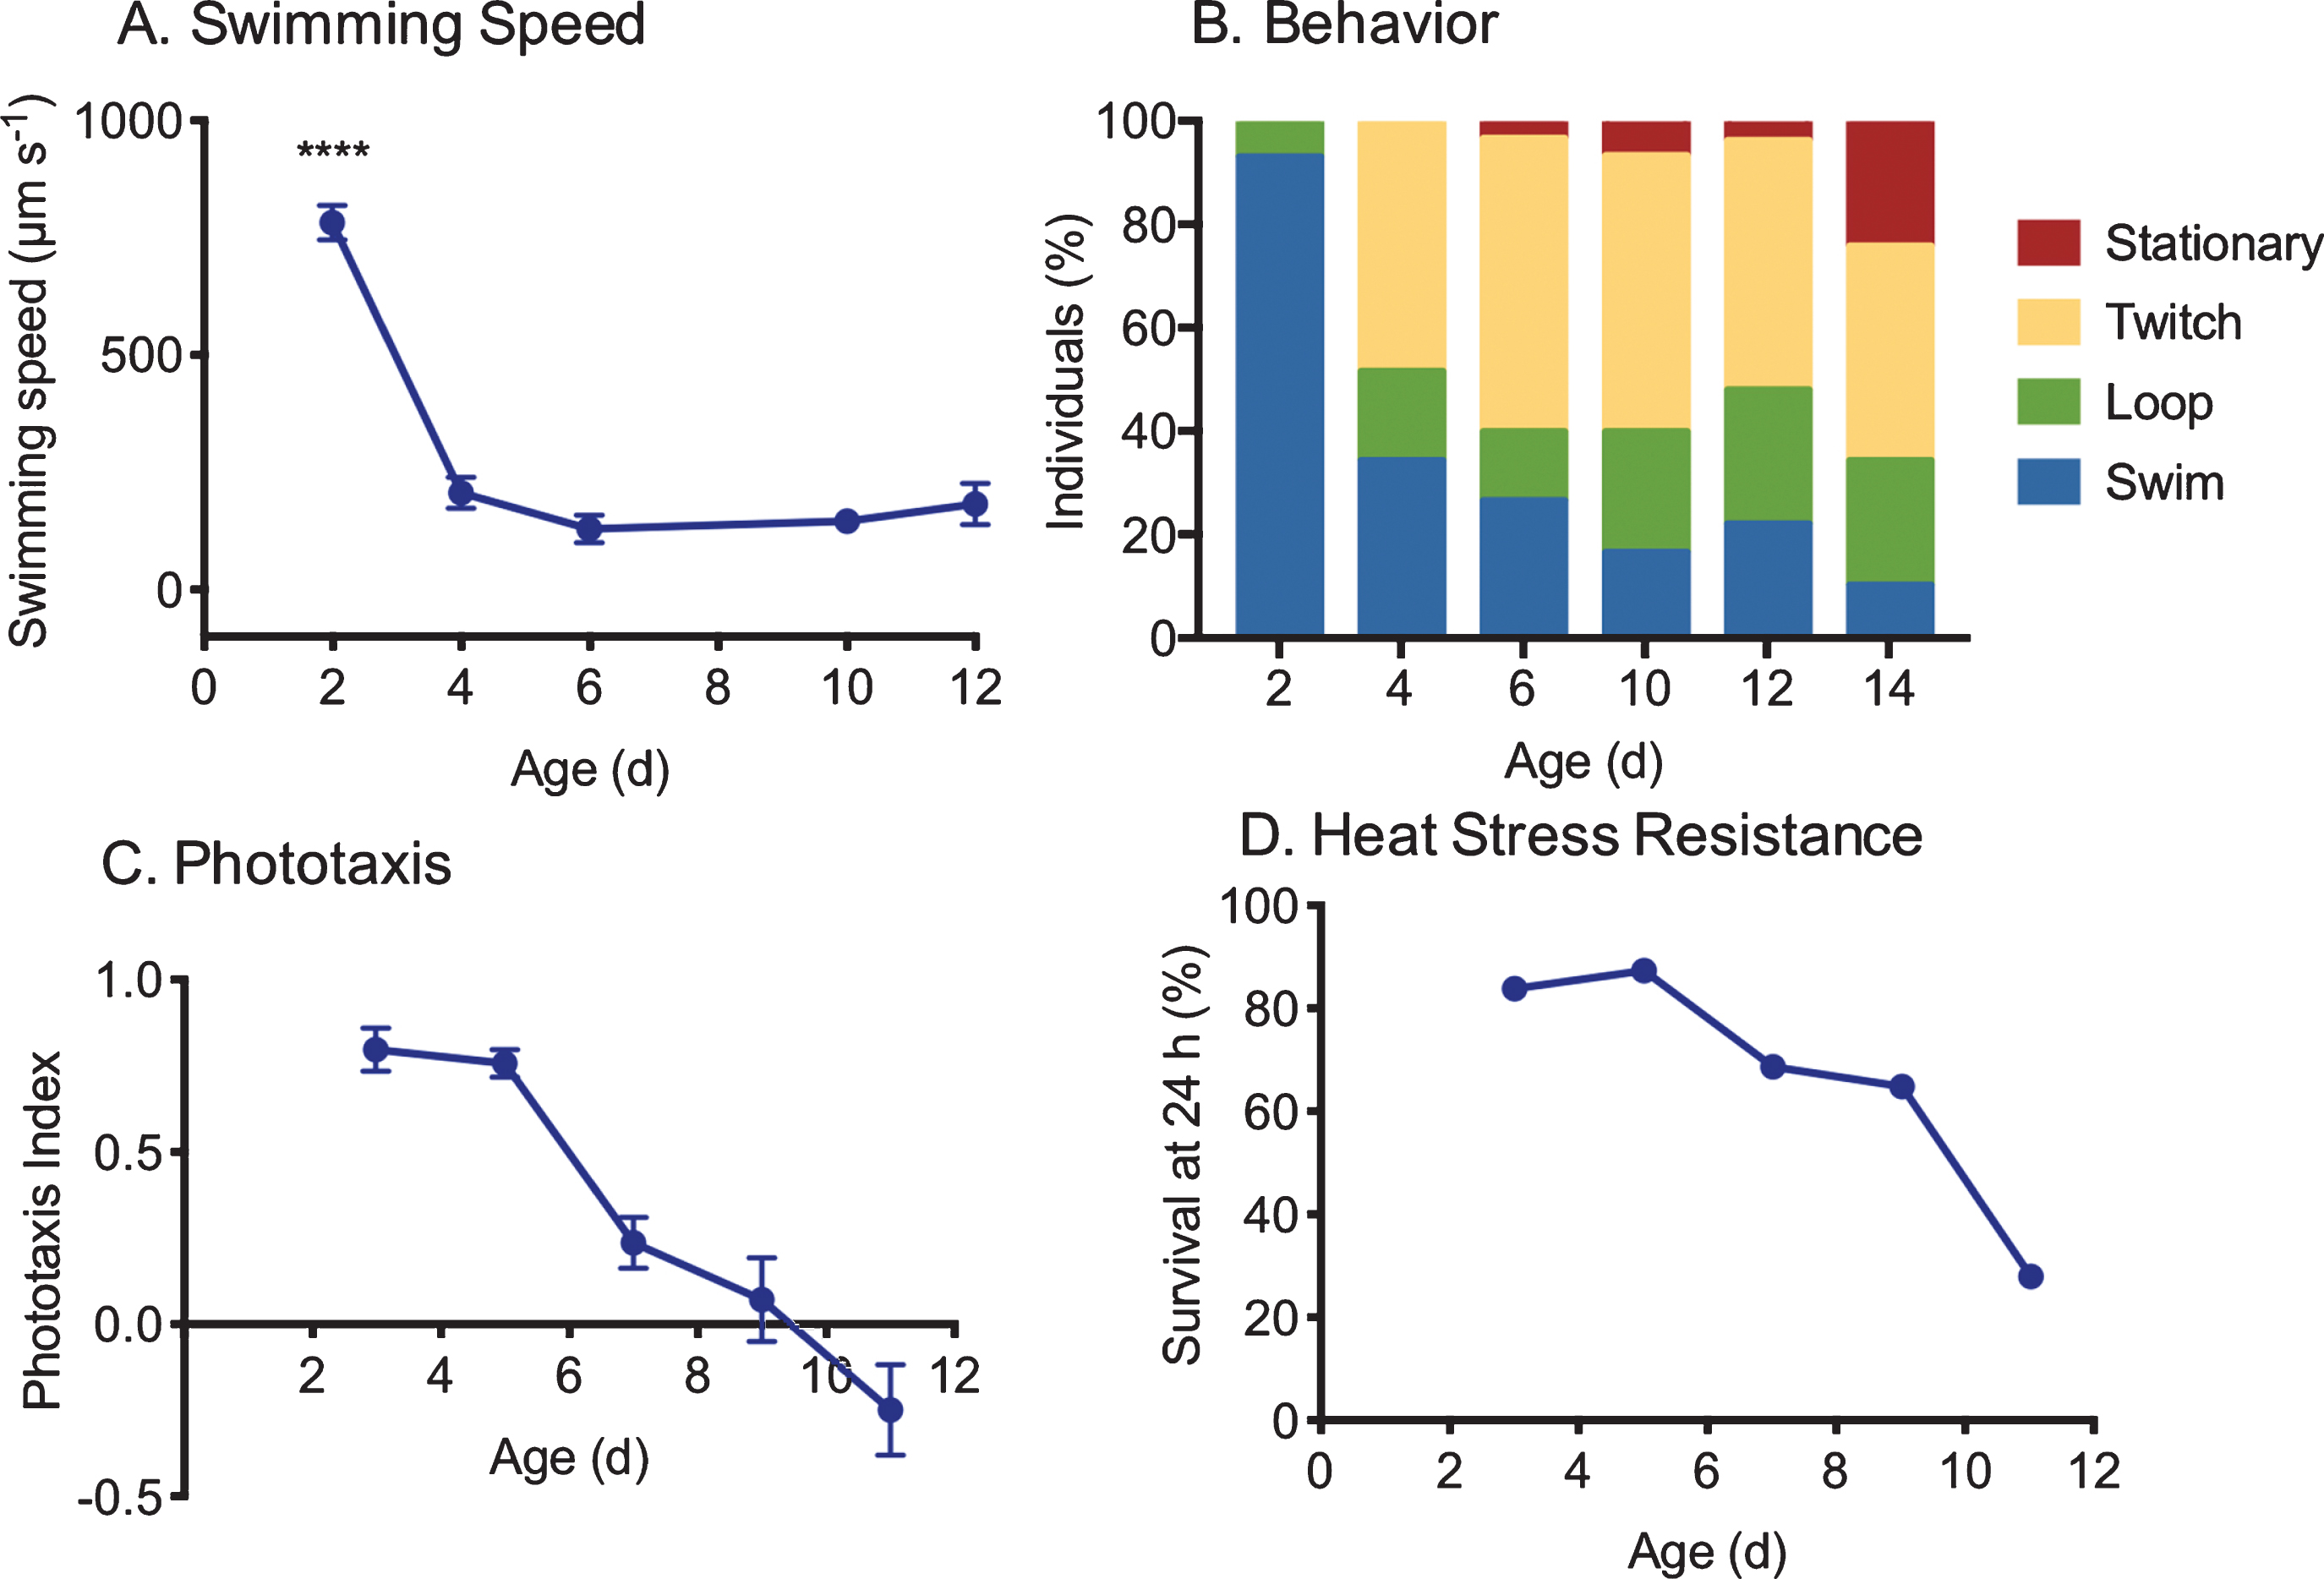 Measures of changes in health with age in asexual, female Brachionus manjavacas (K. Gribble, unpublished data). As rotifers age, (A) swimming speed declines (n = 30), (B) behavior changes from primarily swimming in a straight line or in large circles to predominantly stationary or twitching movements with no forward motion (n = 30), (C) phototaxis (the tendency to swim toward a light source) declines (n = 10/replicate, 5 replicates per age), and (D) survival 24 hours after exposure to heat stress declines by 75% (n = 48 per age).